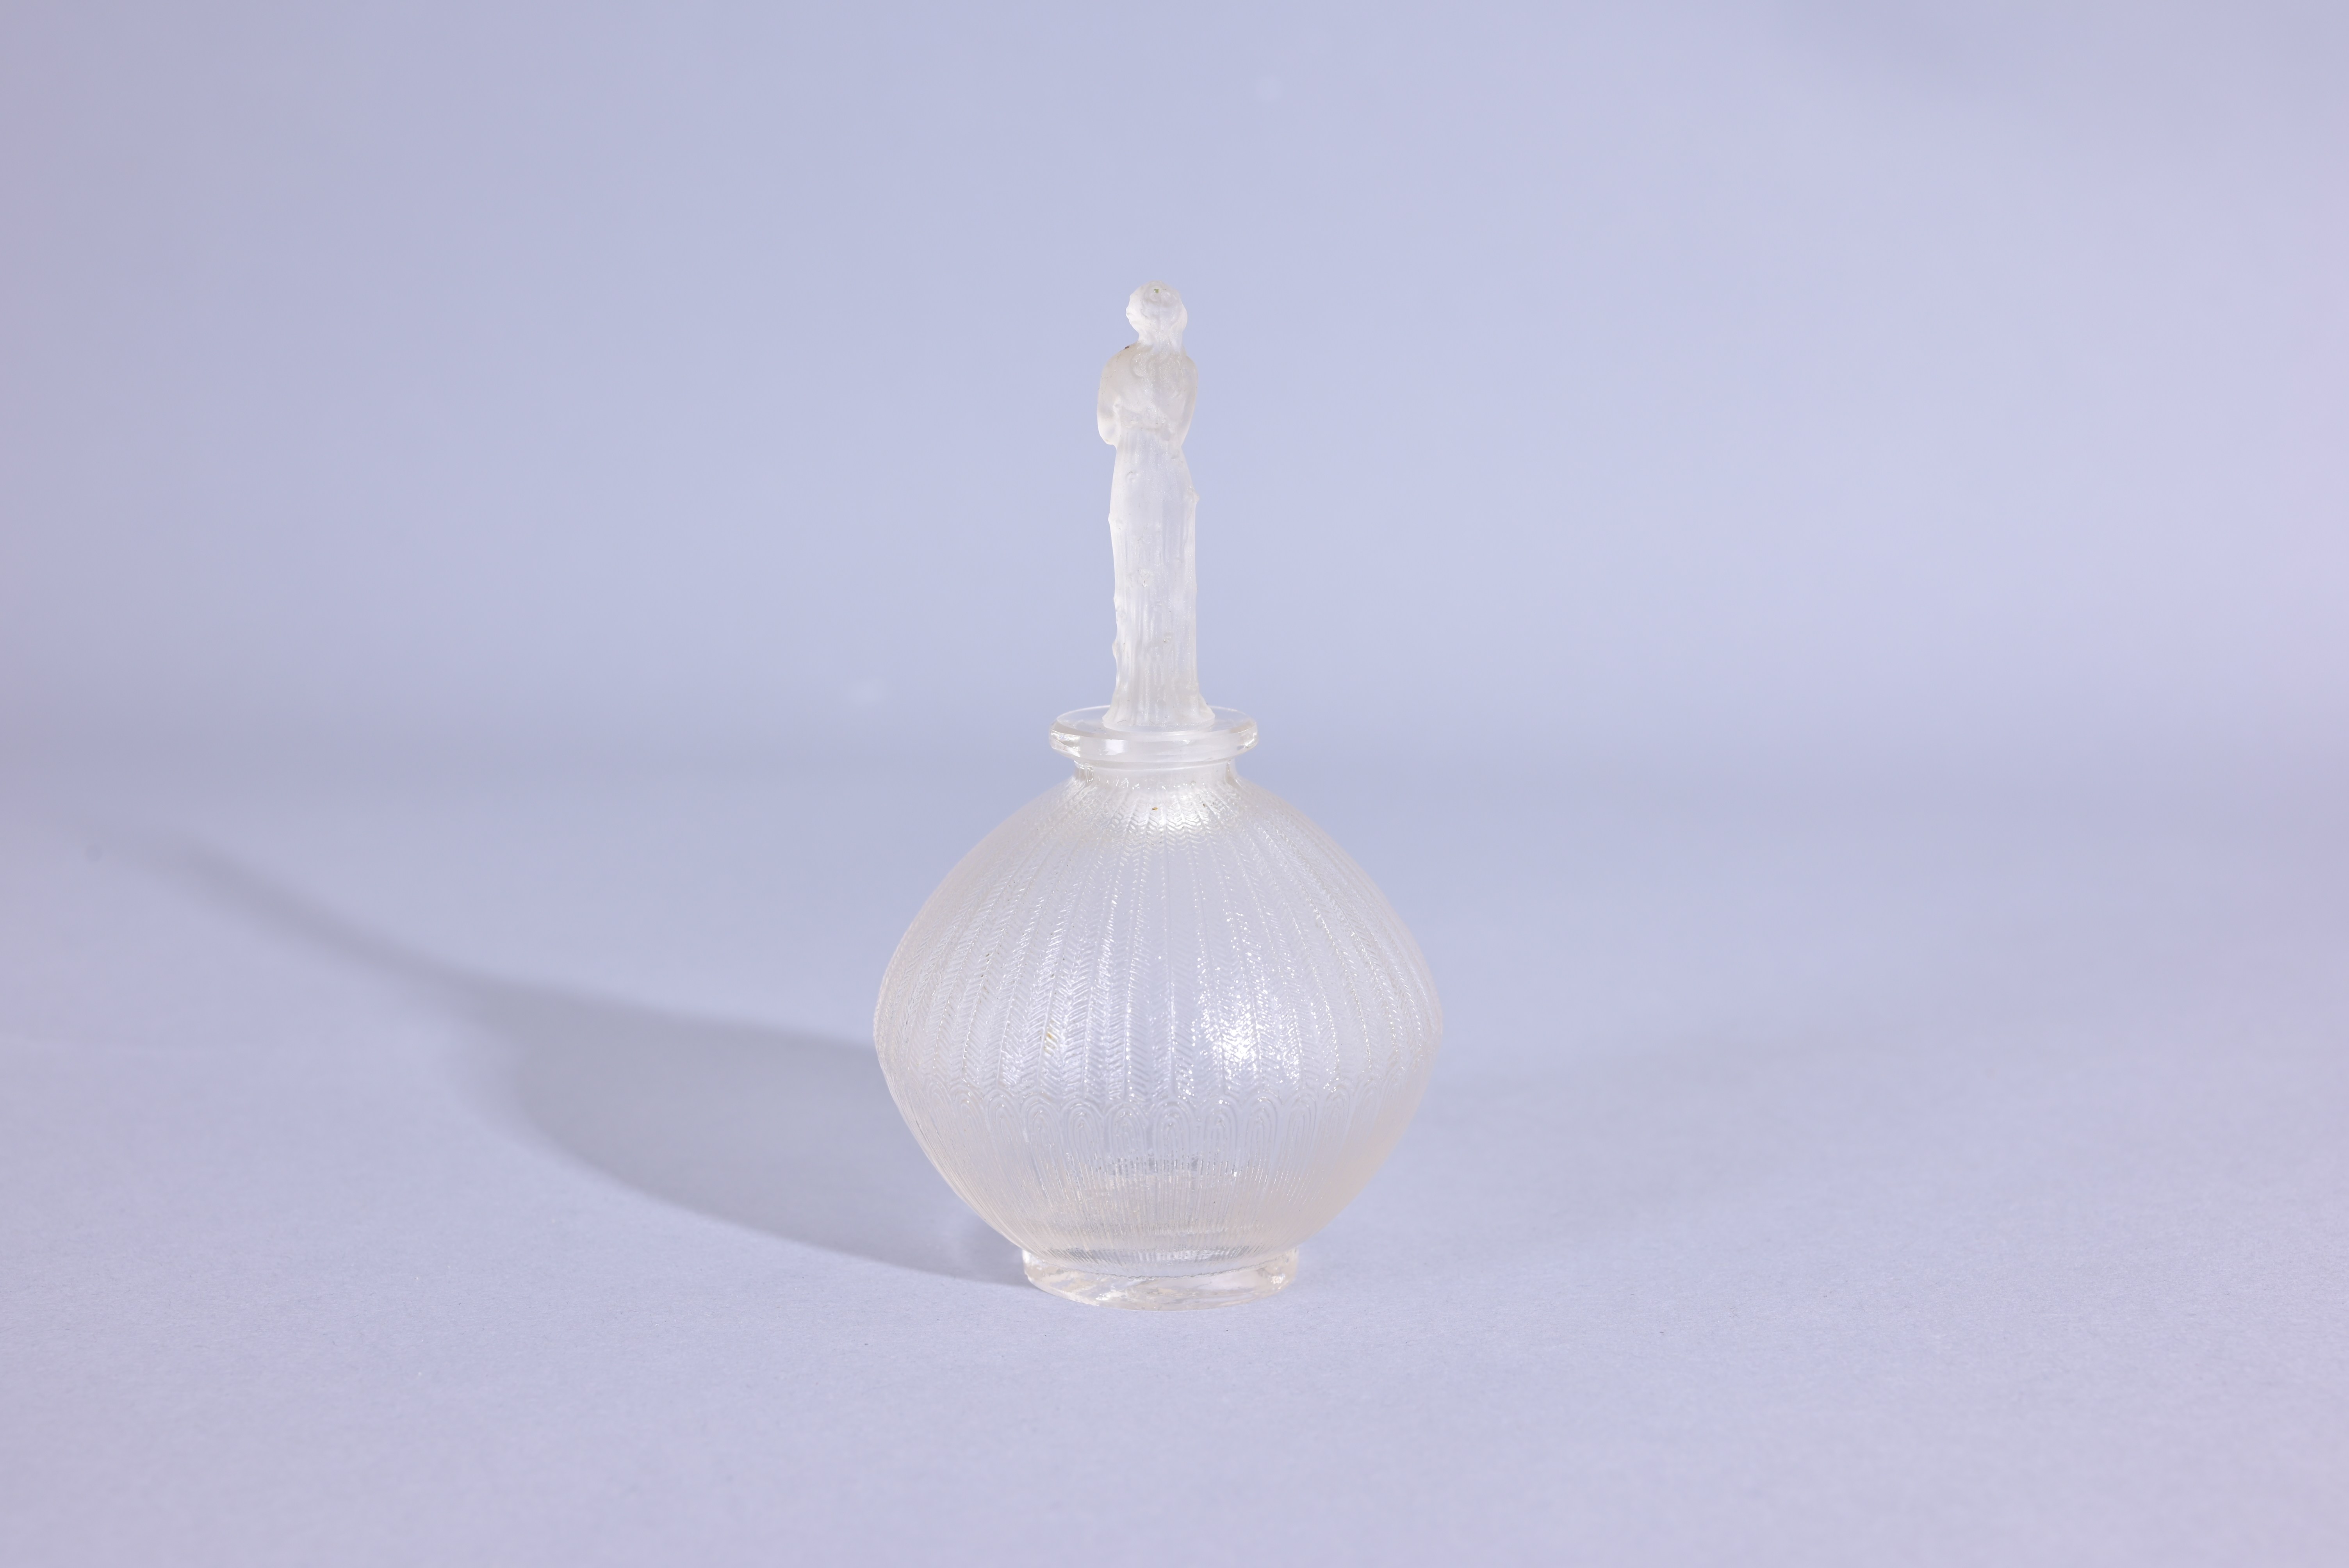 Rene Lalique "Roses" Perfume Bottle for D'Orsay - Image 4 of 7